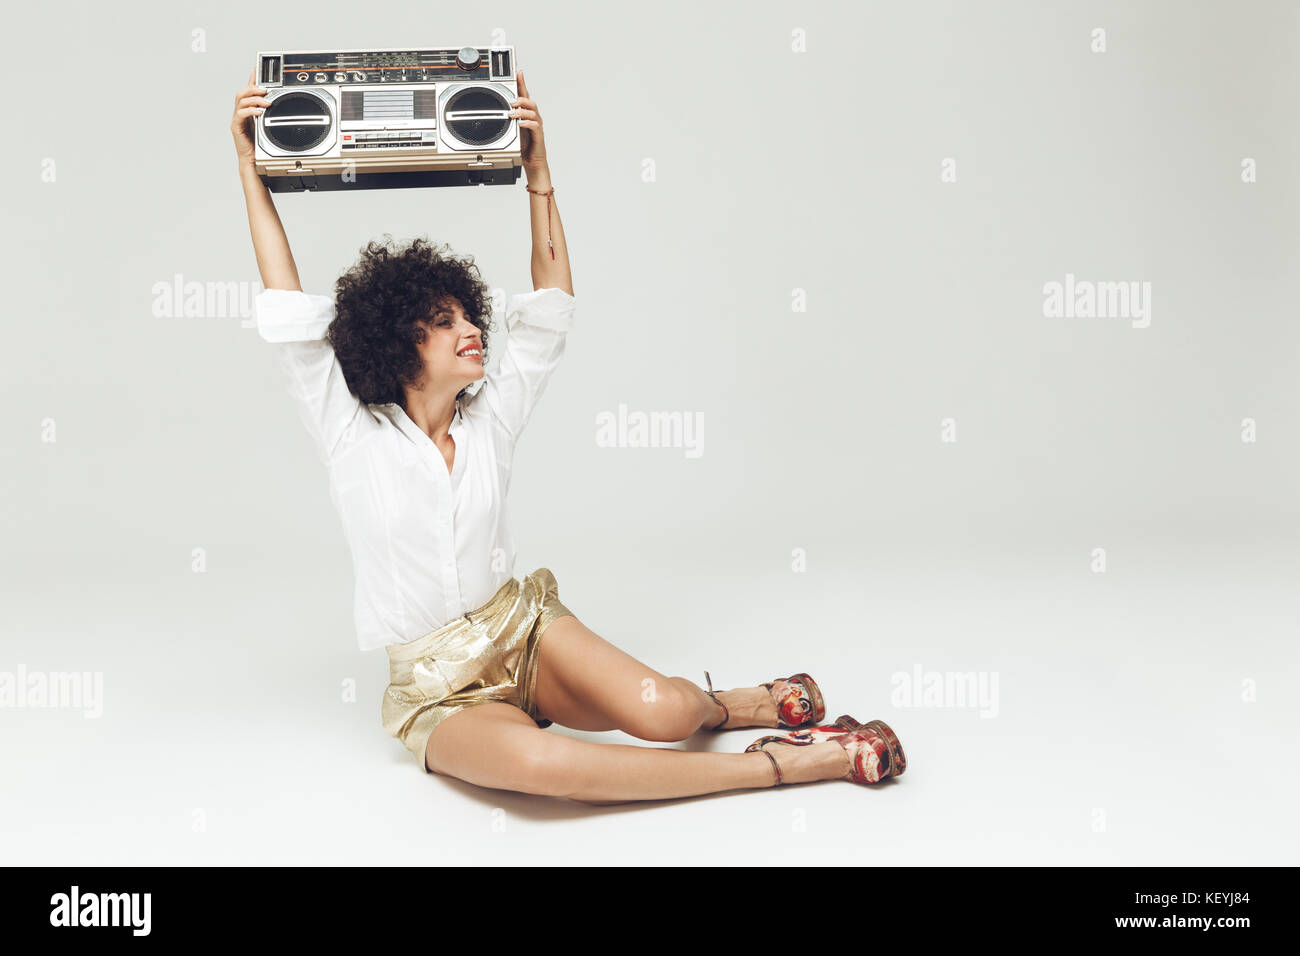 Image of young beautiful retro woman dressed in shirt sitting and posing isolated. Looking aside near boombox. Stock Photo